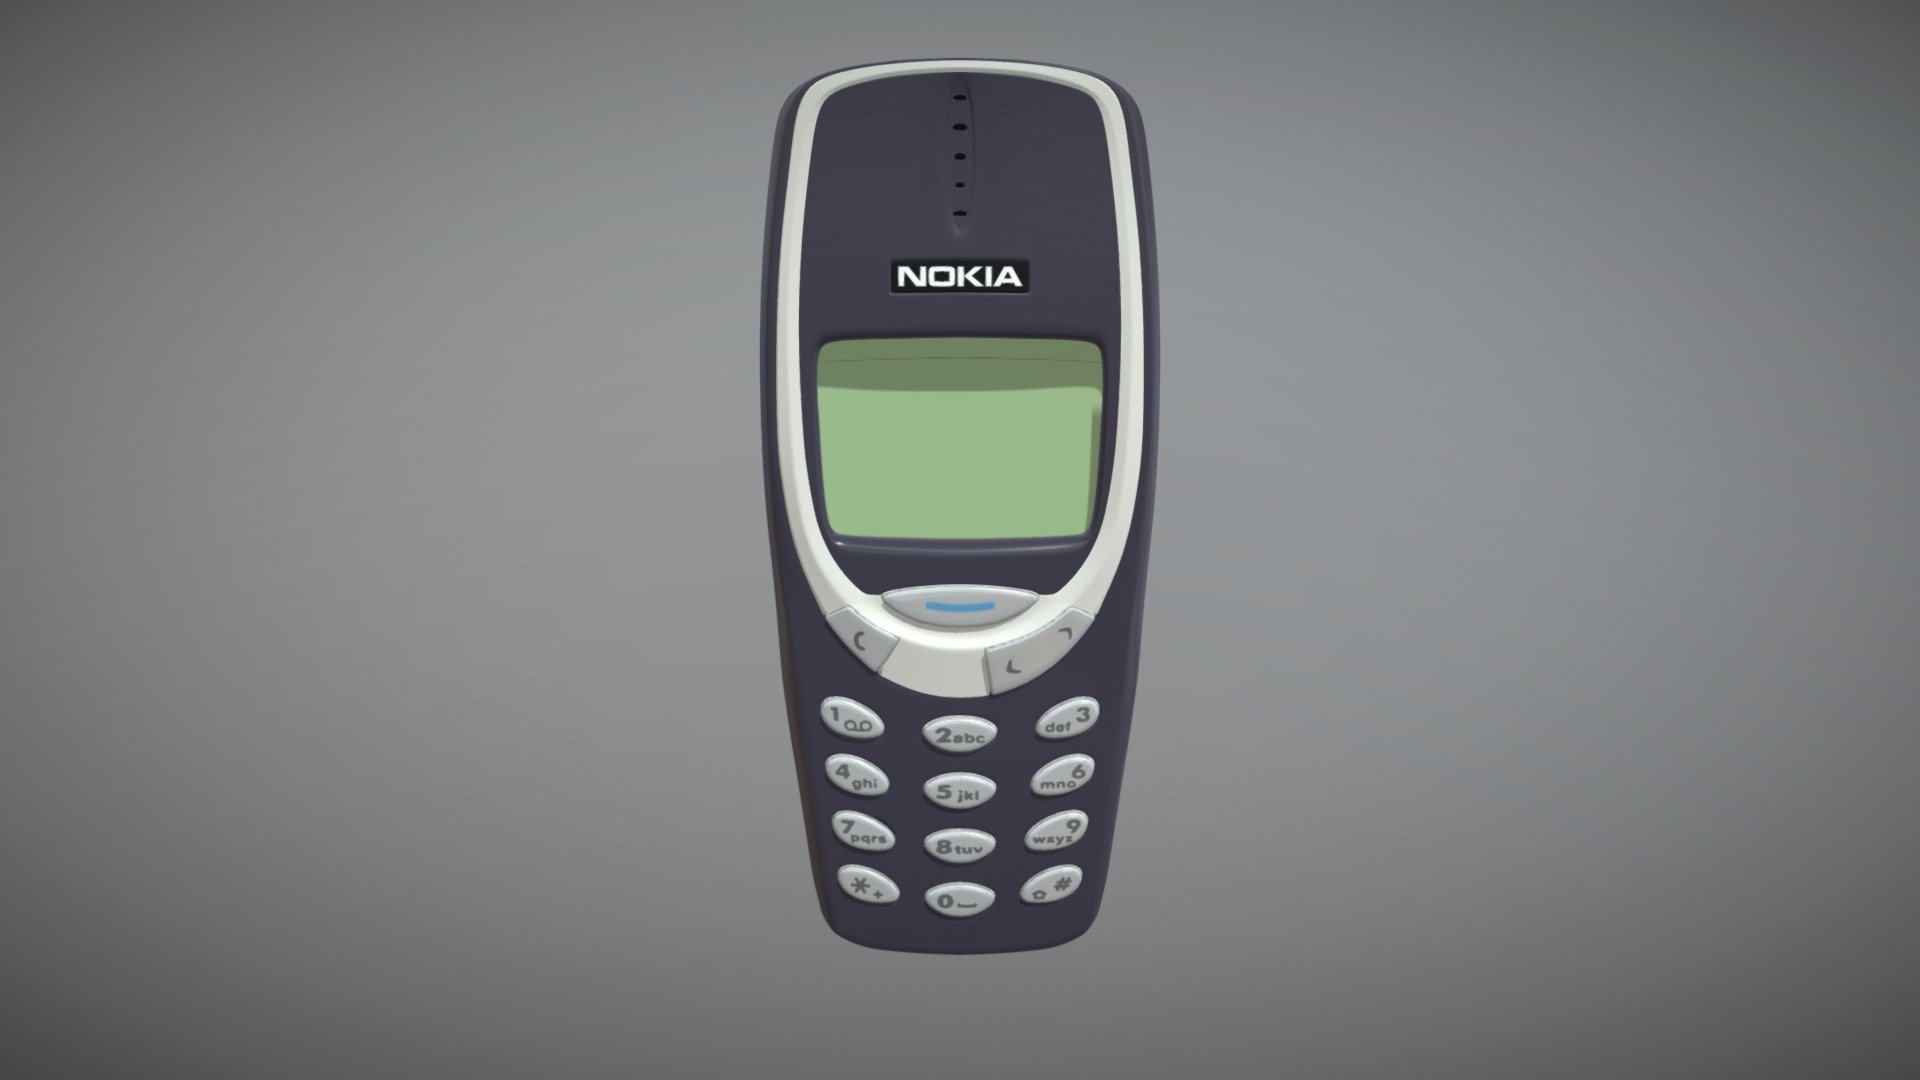 Classic Nokia 3310 phone model, with backlit keys, materials, textures and overlapping UVs. All faces are quads.

All rights to the 3310's original design belong to Nokia 3d model